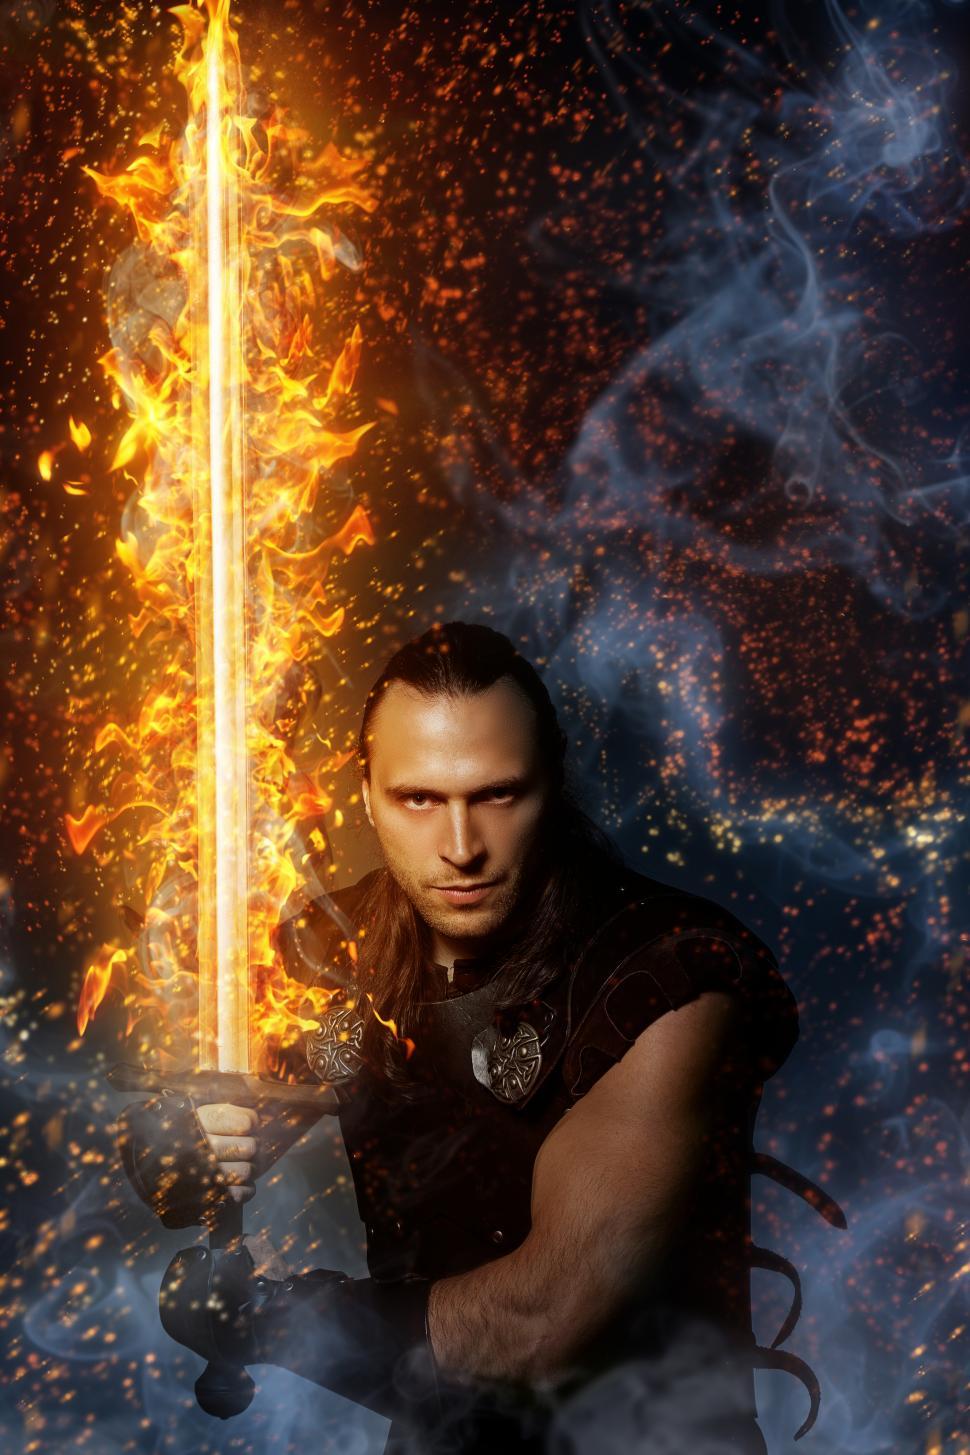 Download Free Stock Photo of Wizardry, magic. Lone warrior with fire sword 